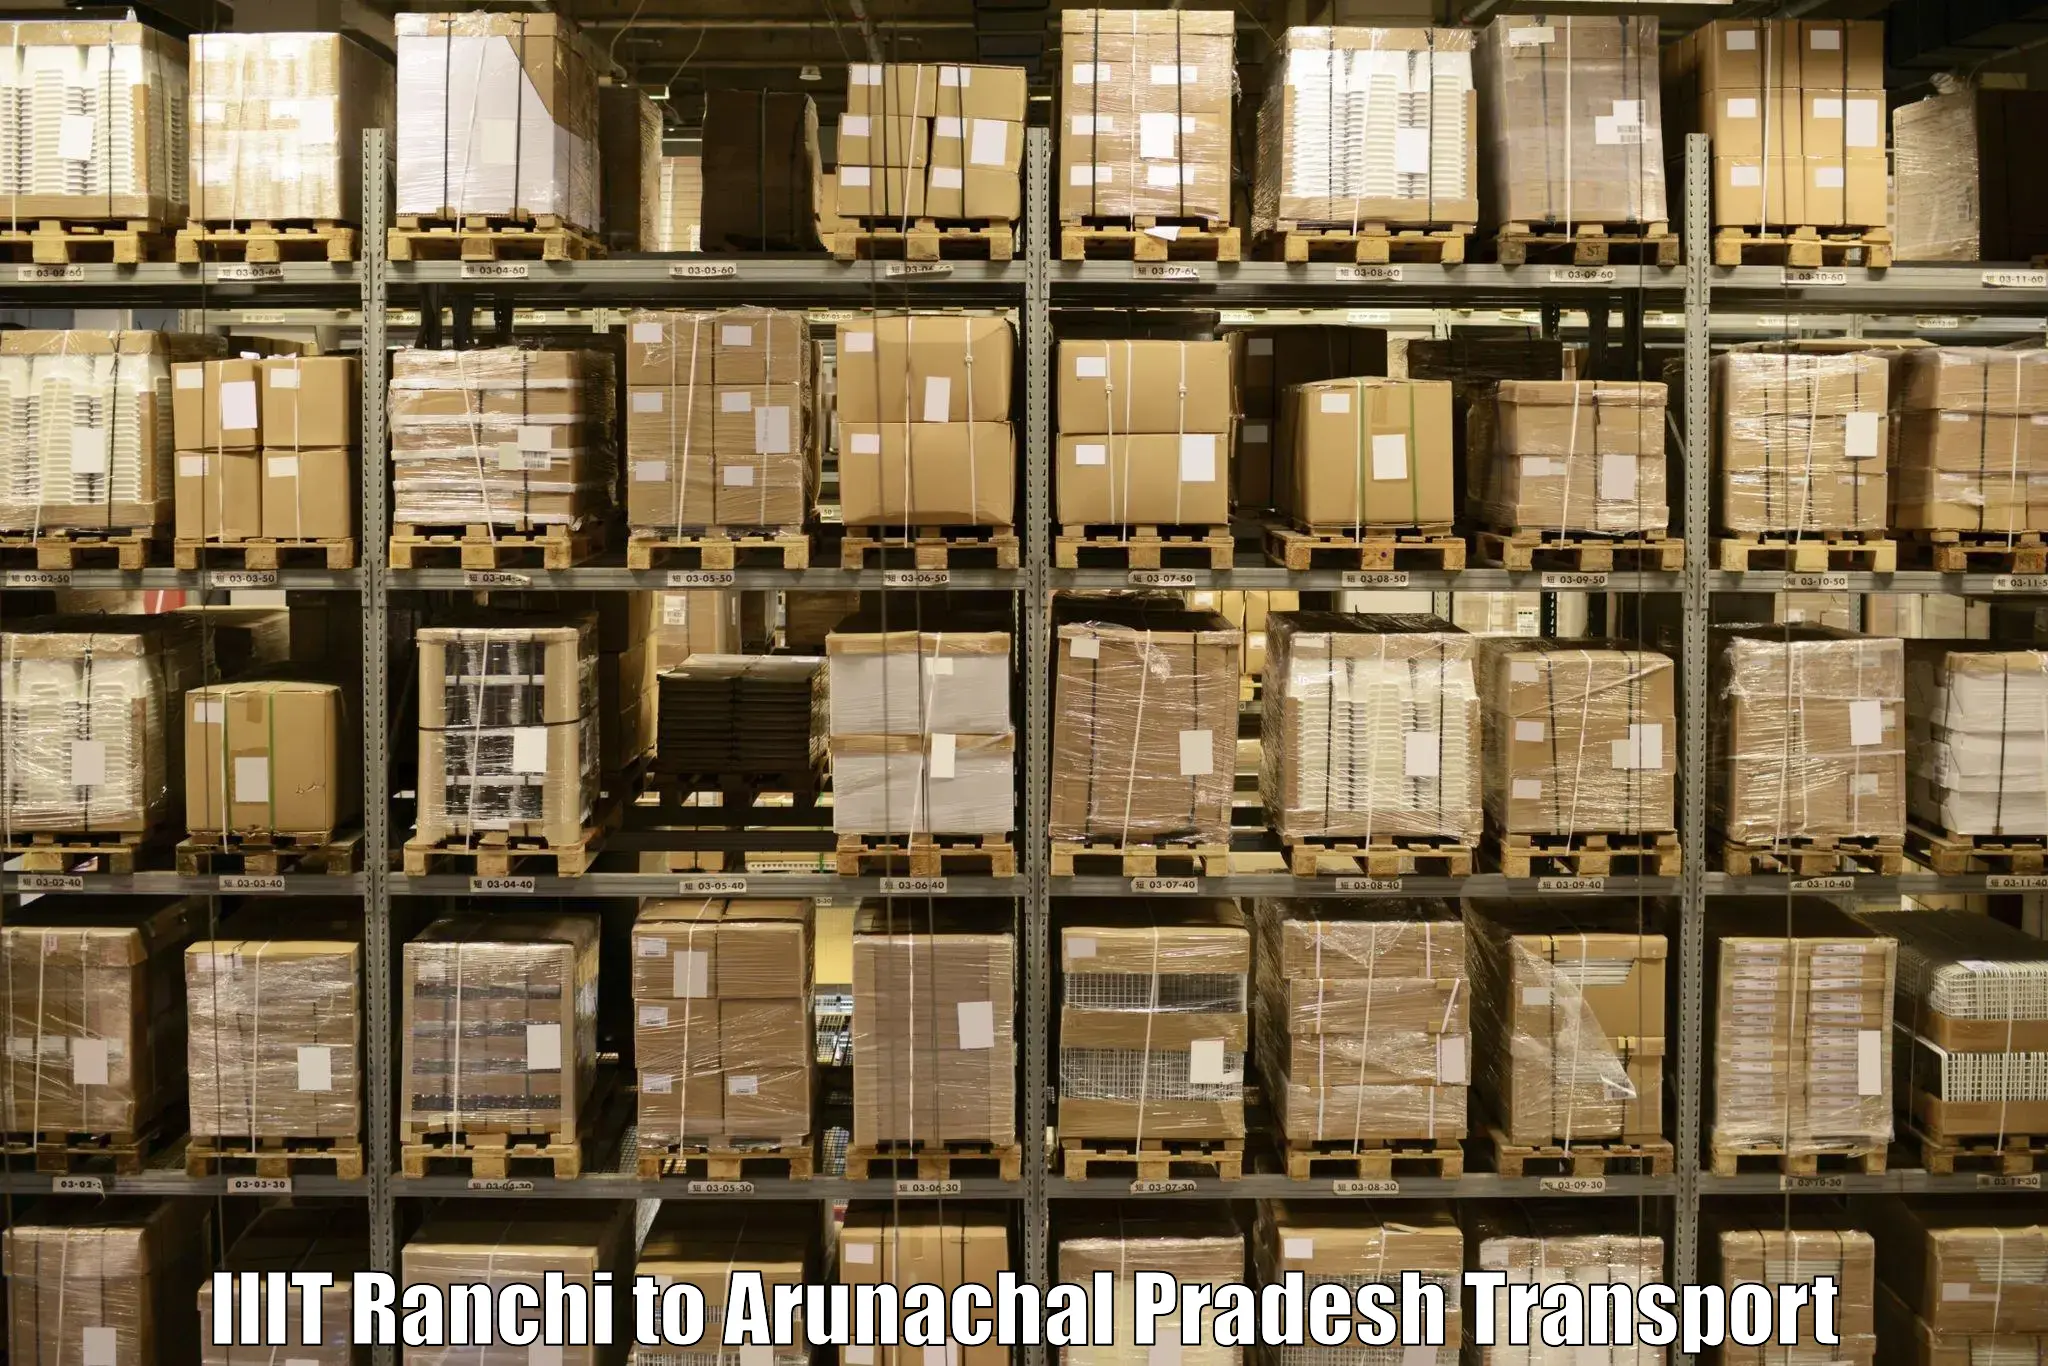 Domestic transport services IIIT Ranchi to Deomali